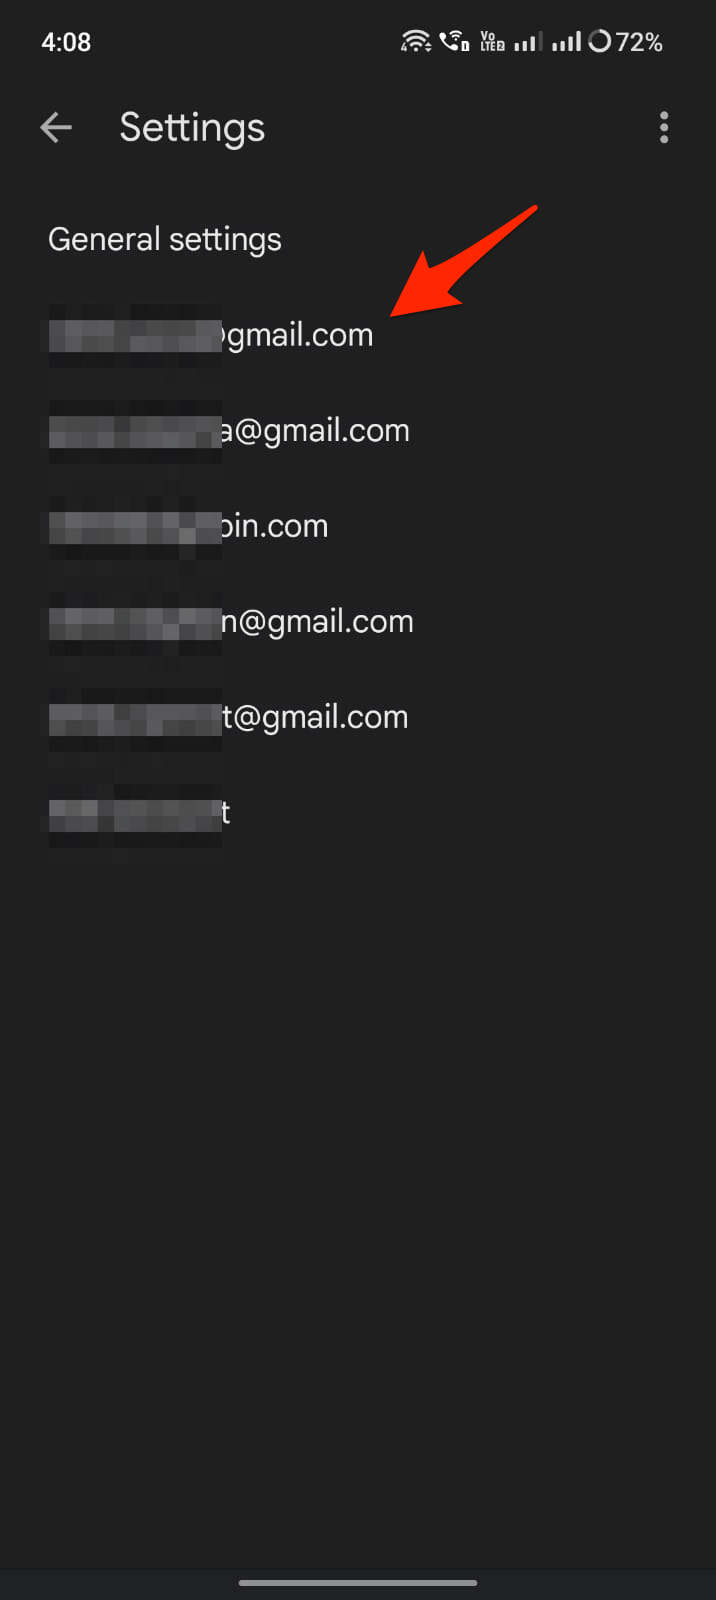 Select the Gmail Account